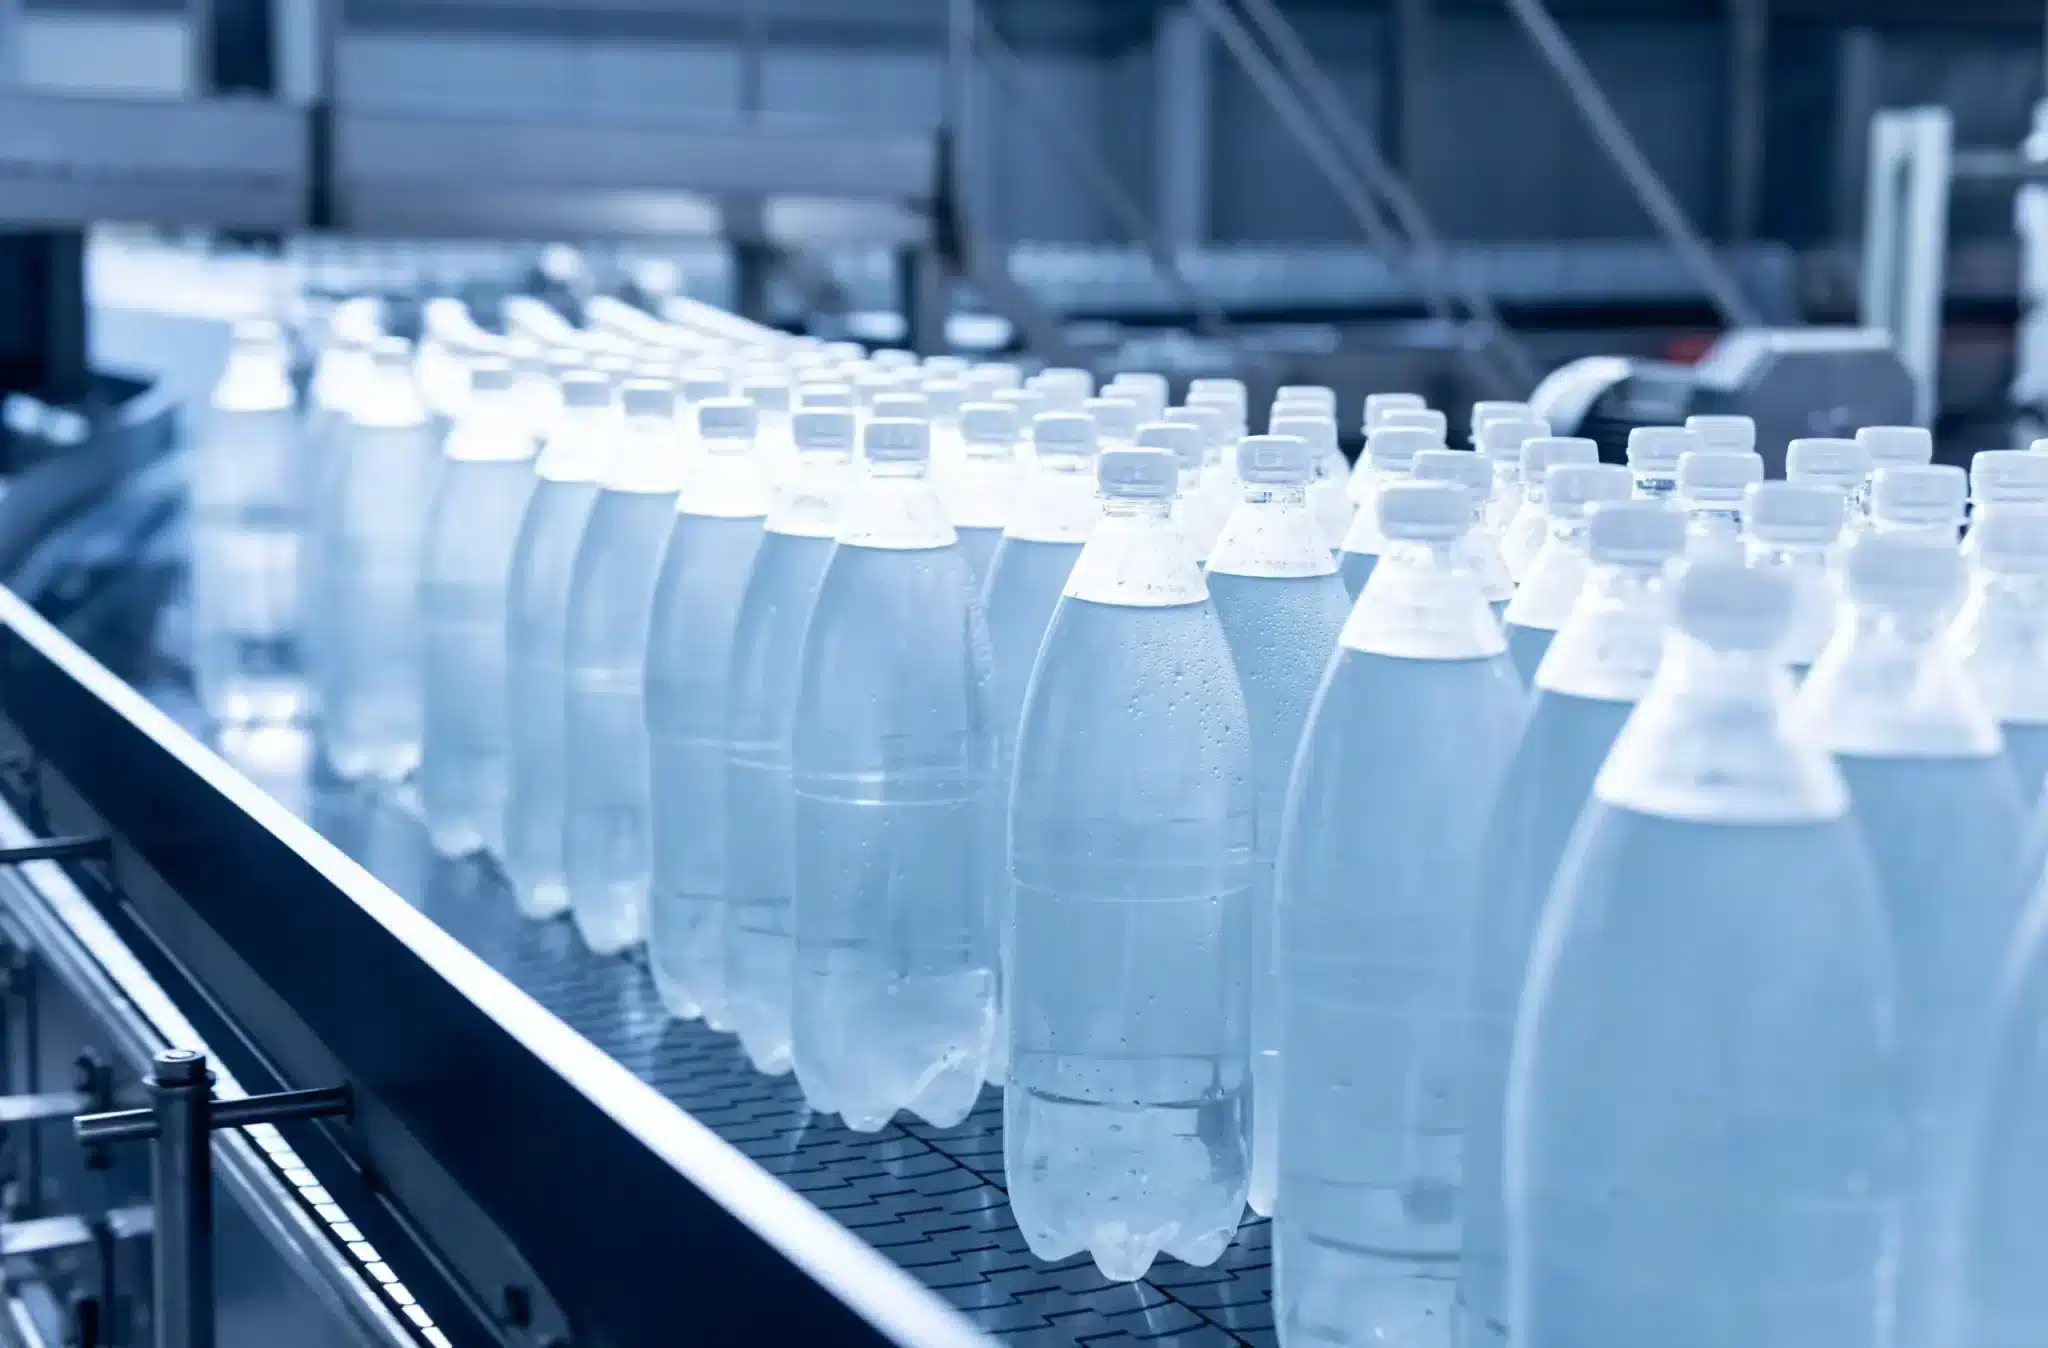 A production line in a factory with a row of clear, empty plastic bottles moving along a conveyor belt. The image captures the industrial process of packaging with a cool, blue tone, emphasizing the bottles' uniformity and the automated manufacturing environment.